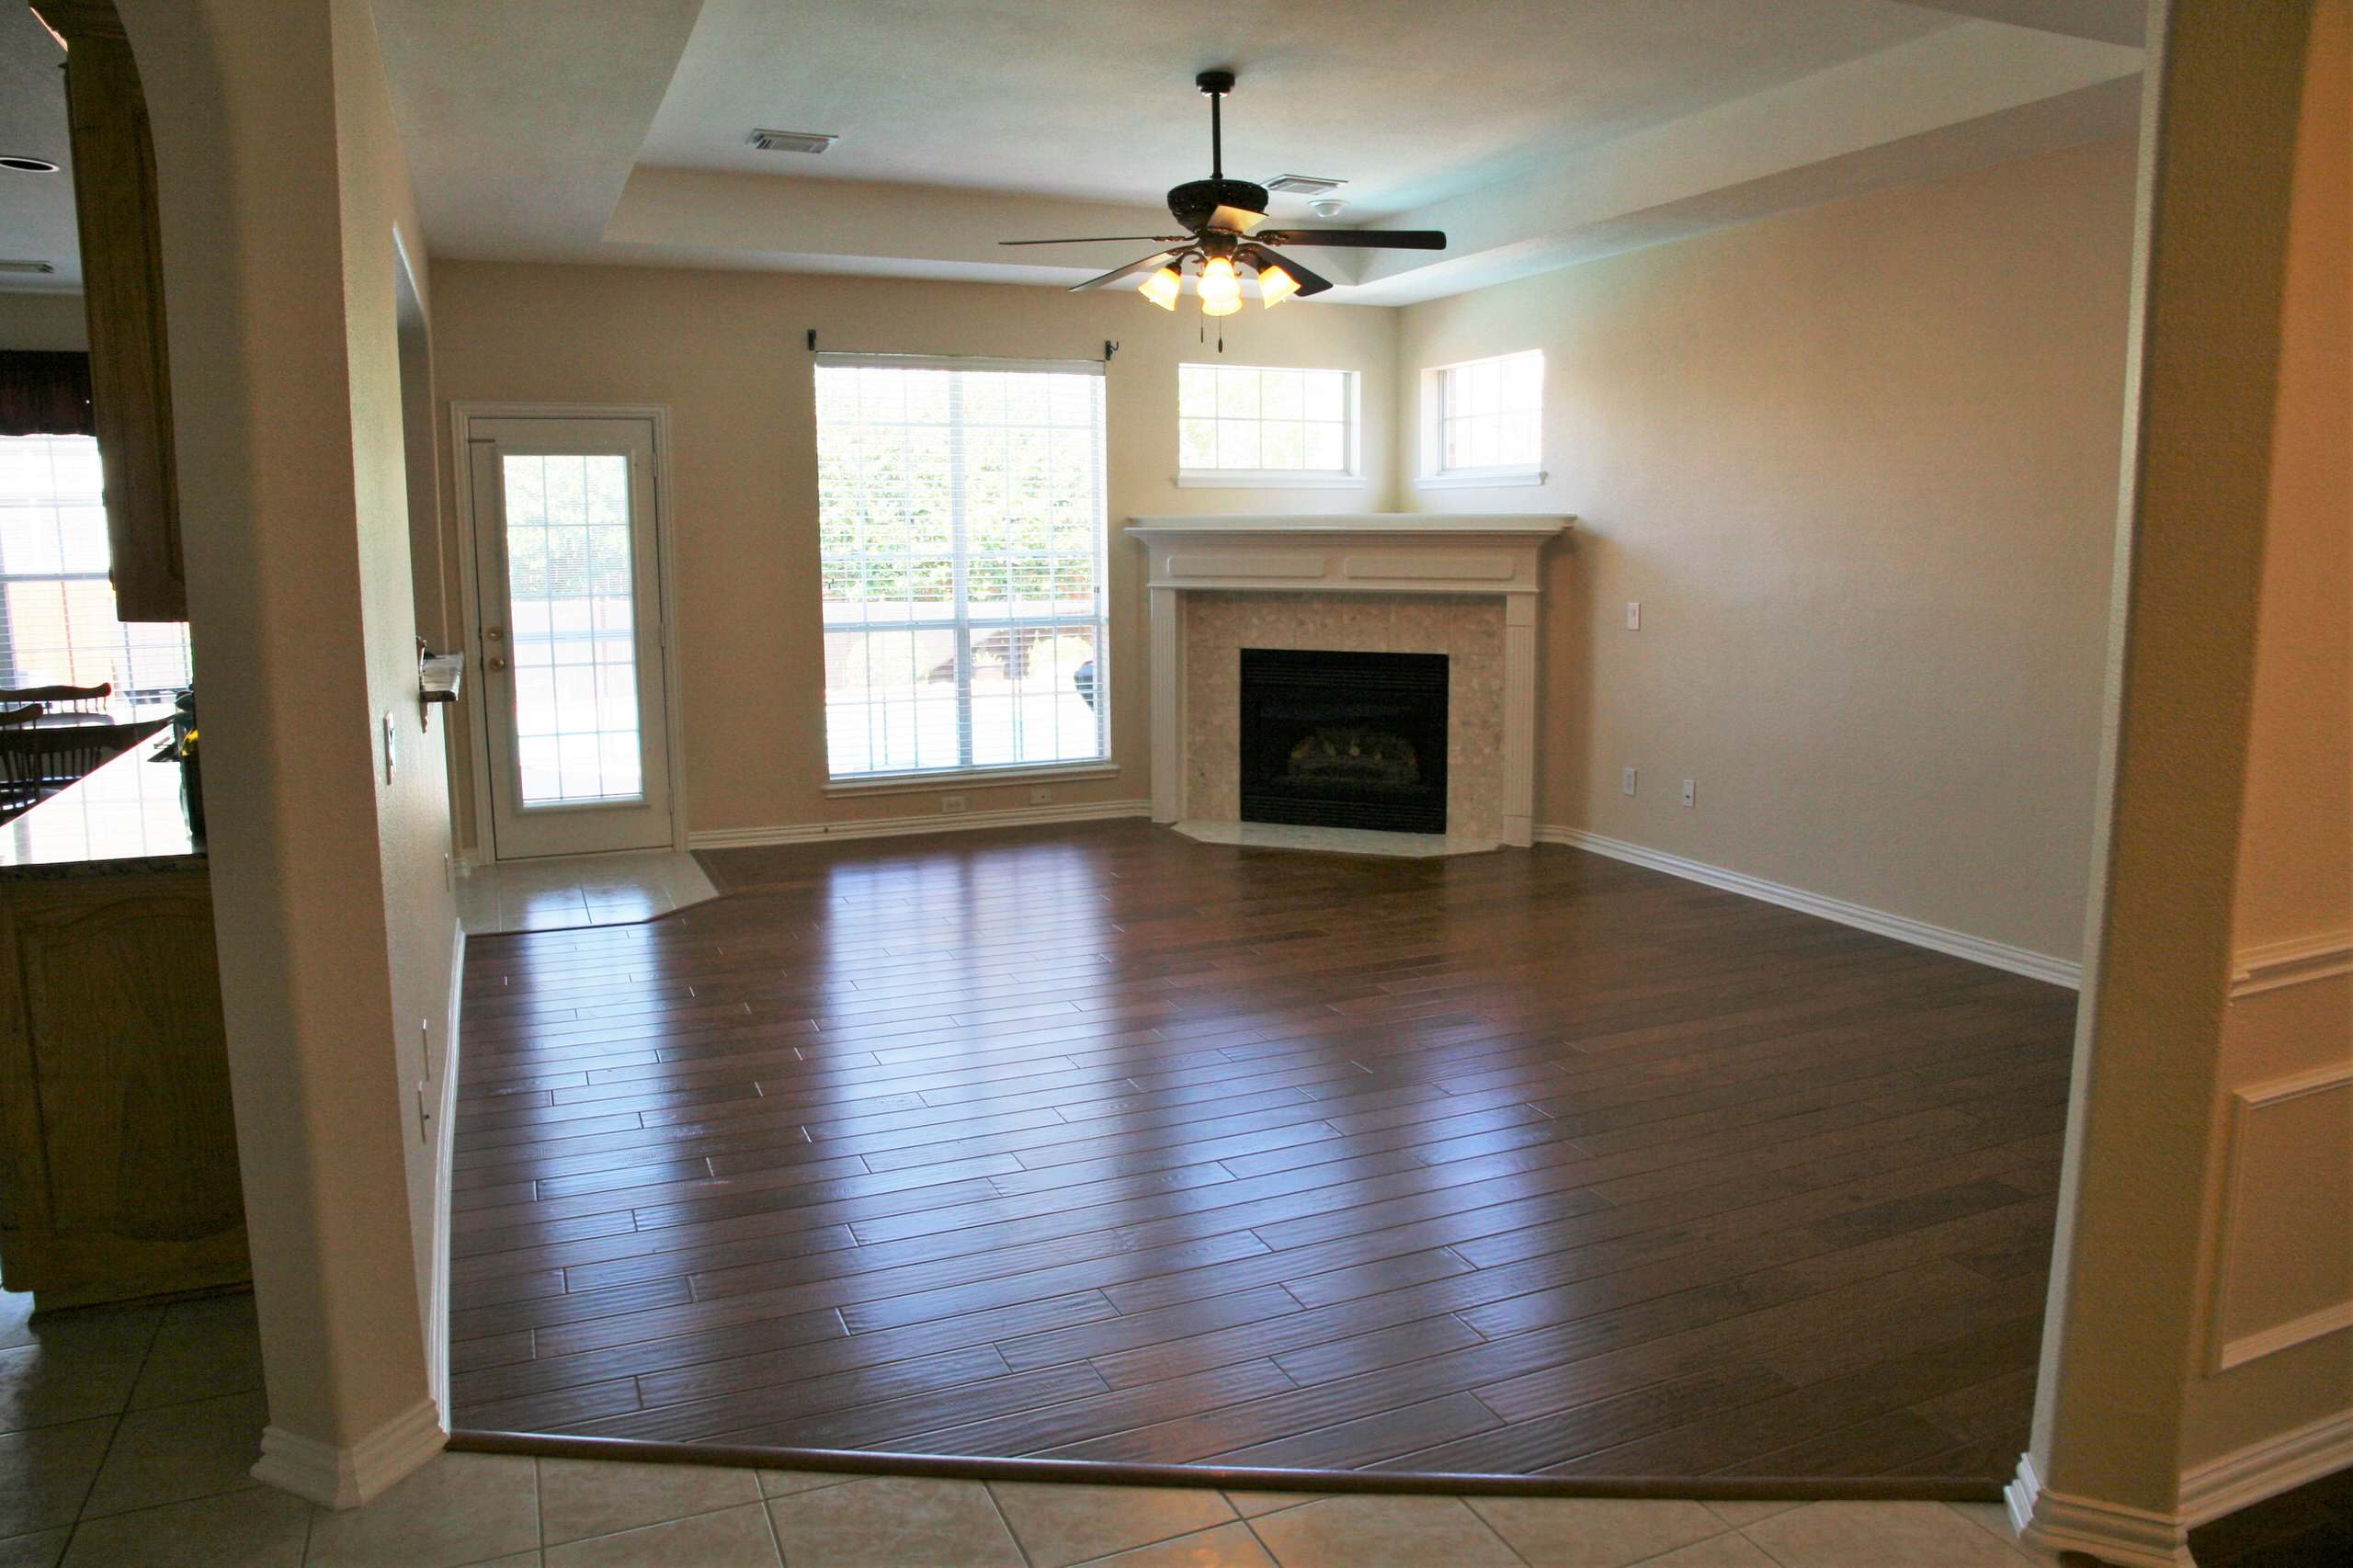 Formal Living Area conversion to Home Office with wood flooring